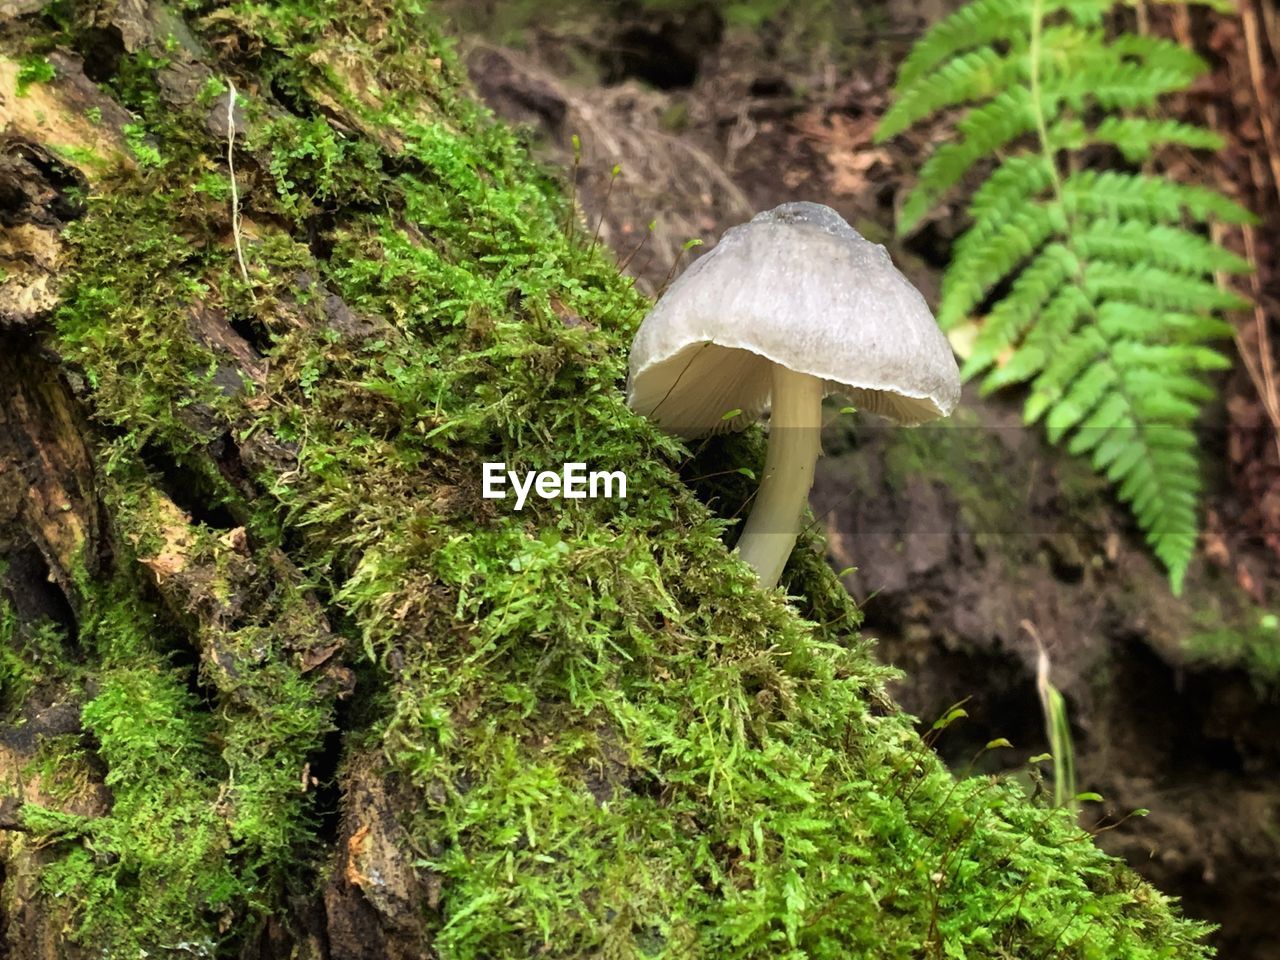 CLOSE-UP OF MUSHROOMS GROWING IN FOREST